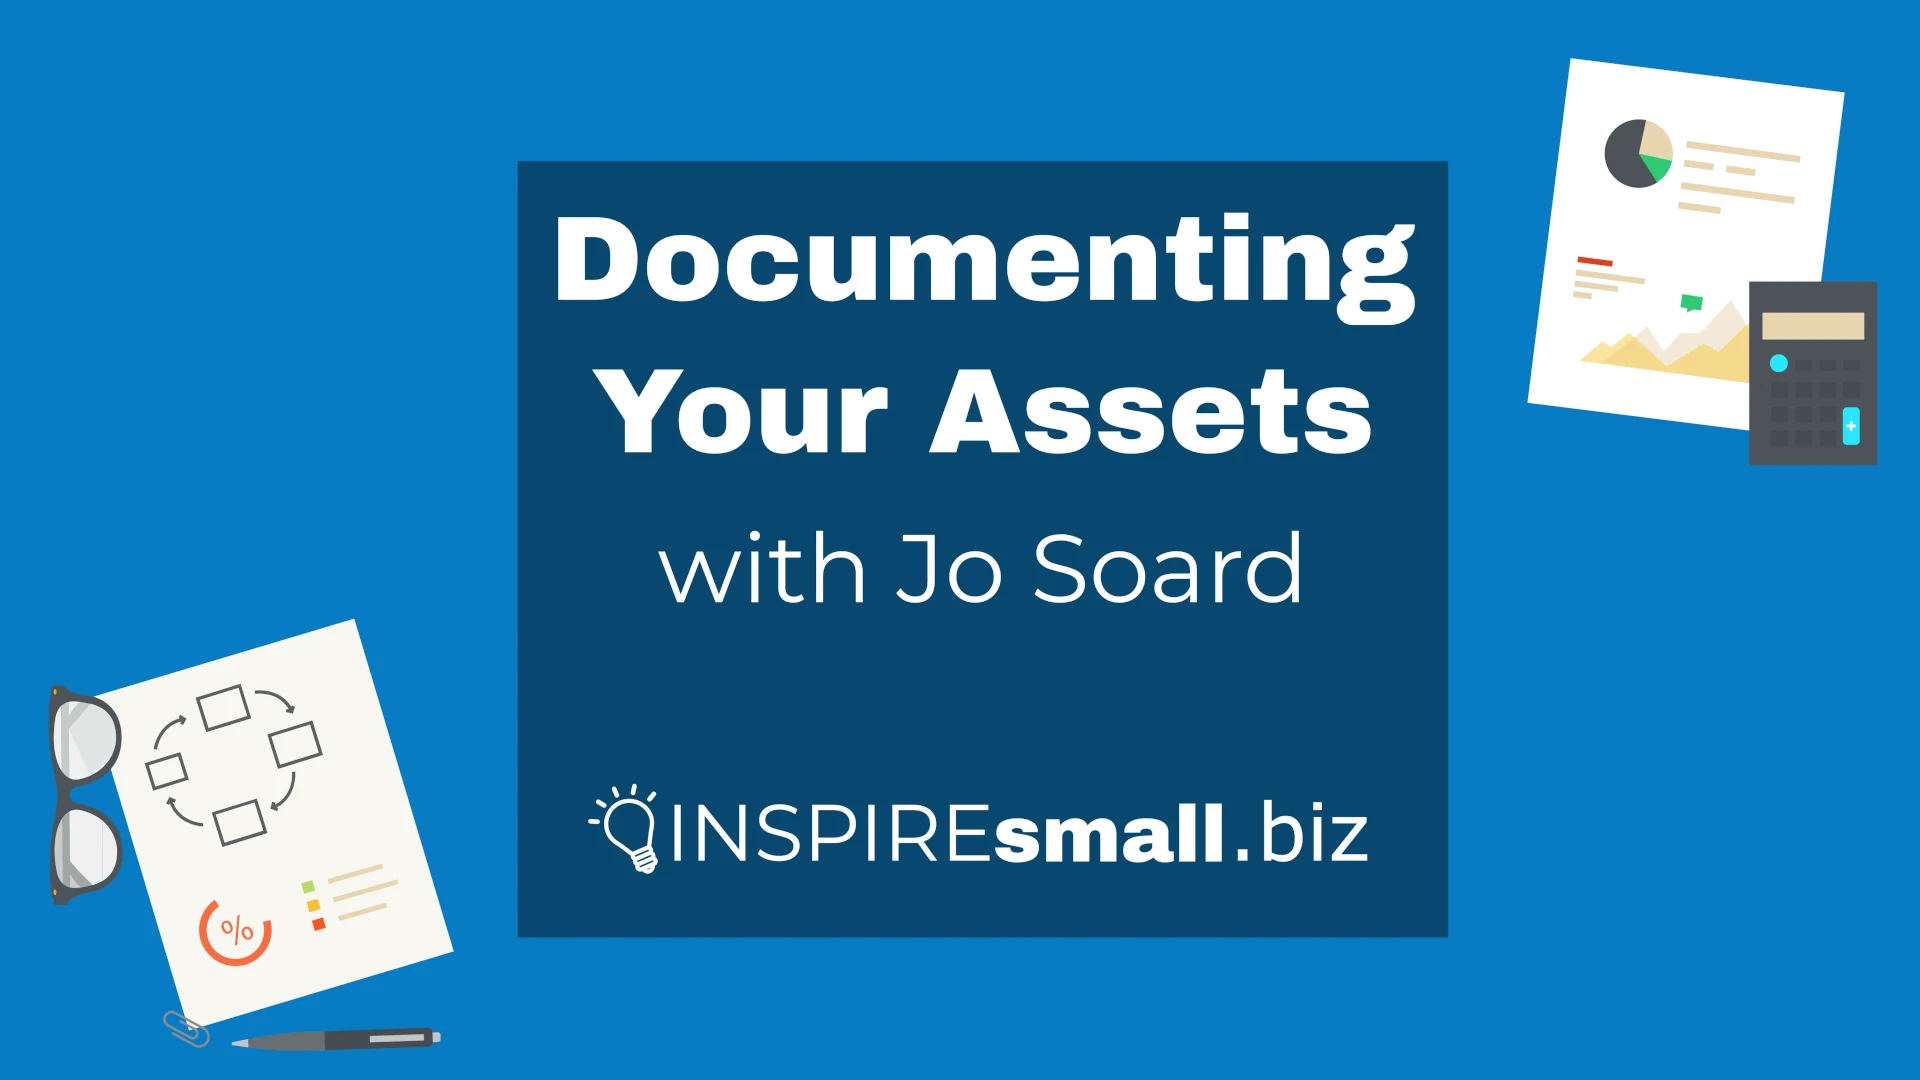 A blue desk, with paperwork on both sides, a calculator on the right, and other desk accoutrements on the left. The text in the middle read Documenting Your Assets with Jo Soard from INSPIREsmall.biz